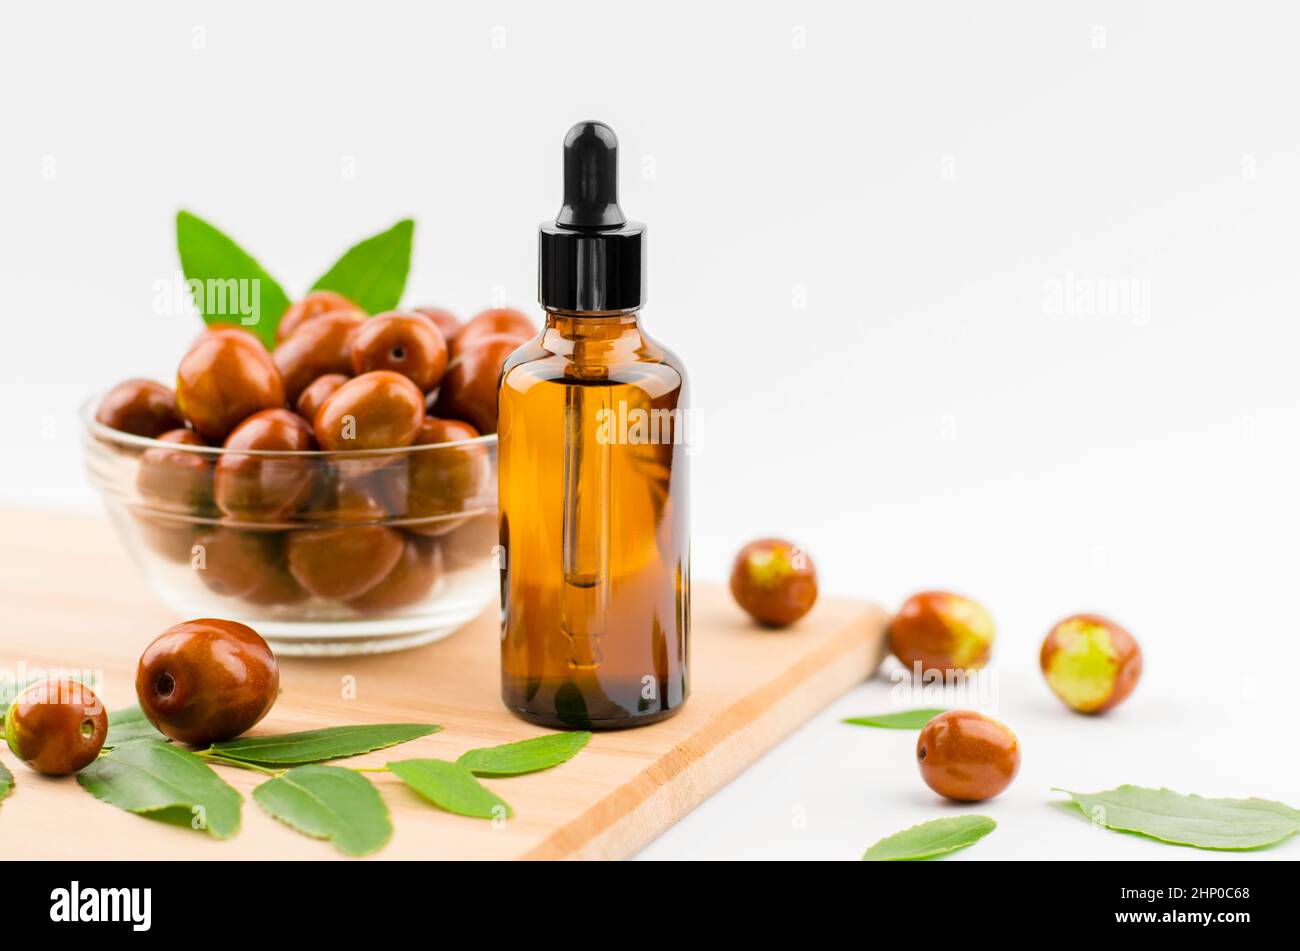 Jojoba oil in a bottle with a dropper on a wooden table with ripe jojoba fruits. Chinese Date Oil and Fruit Stock Photo